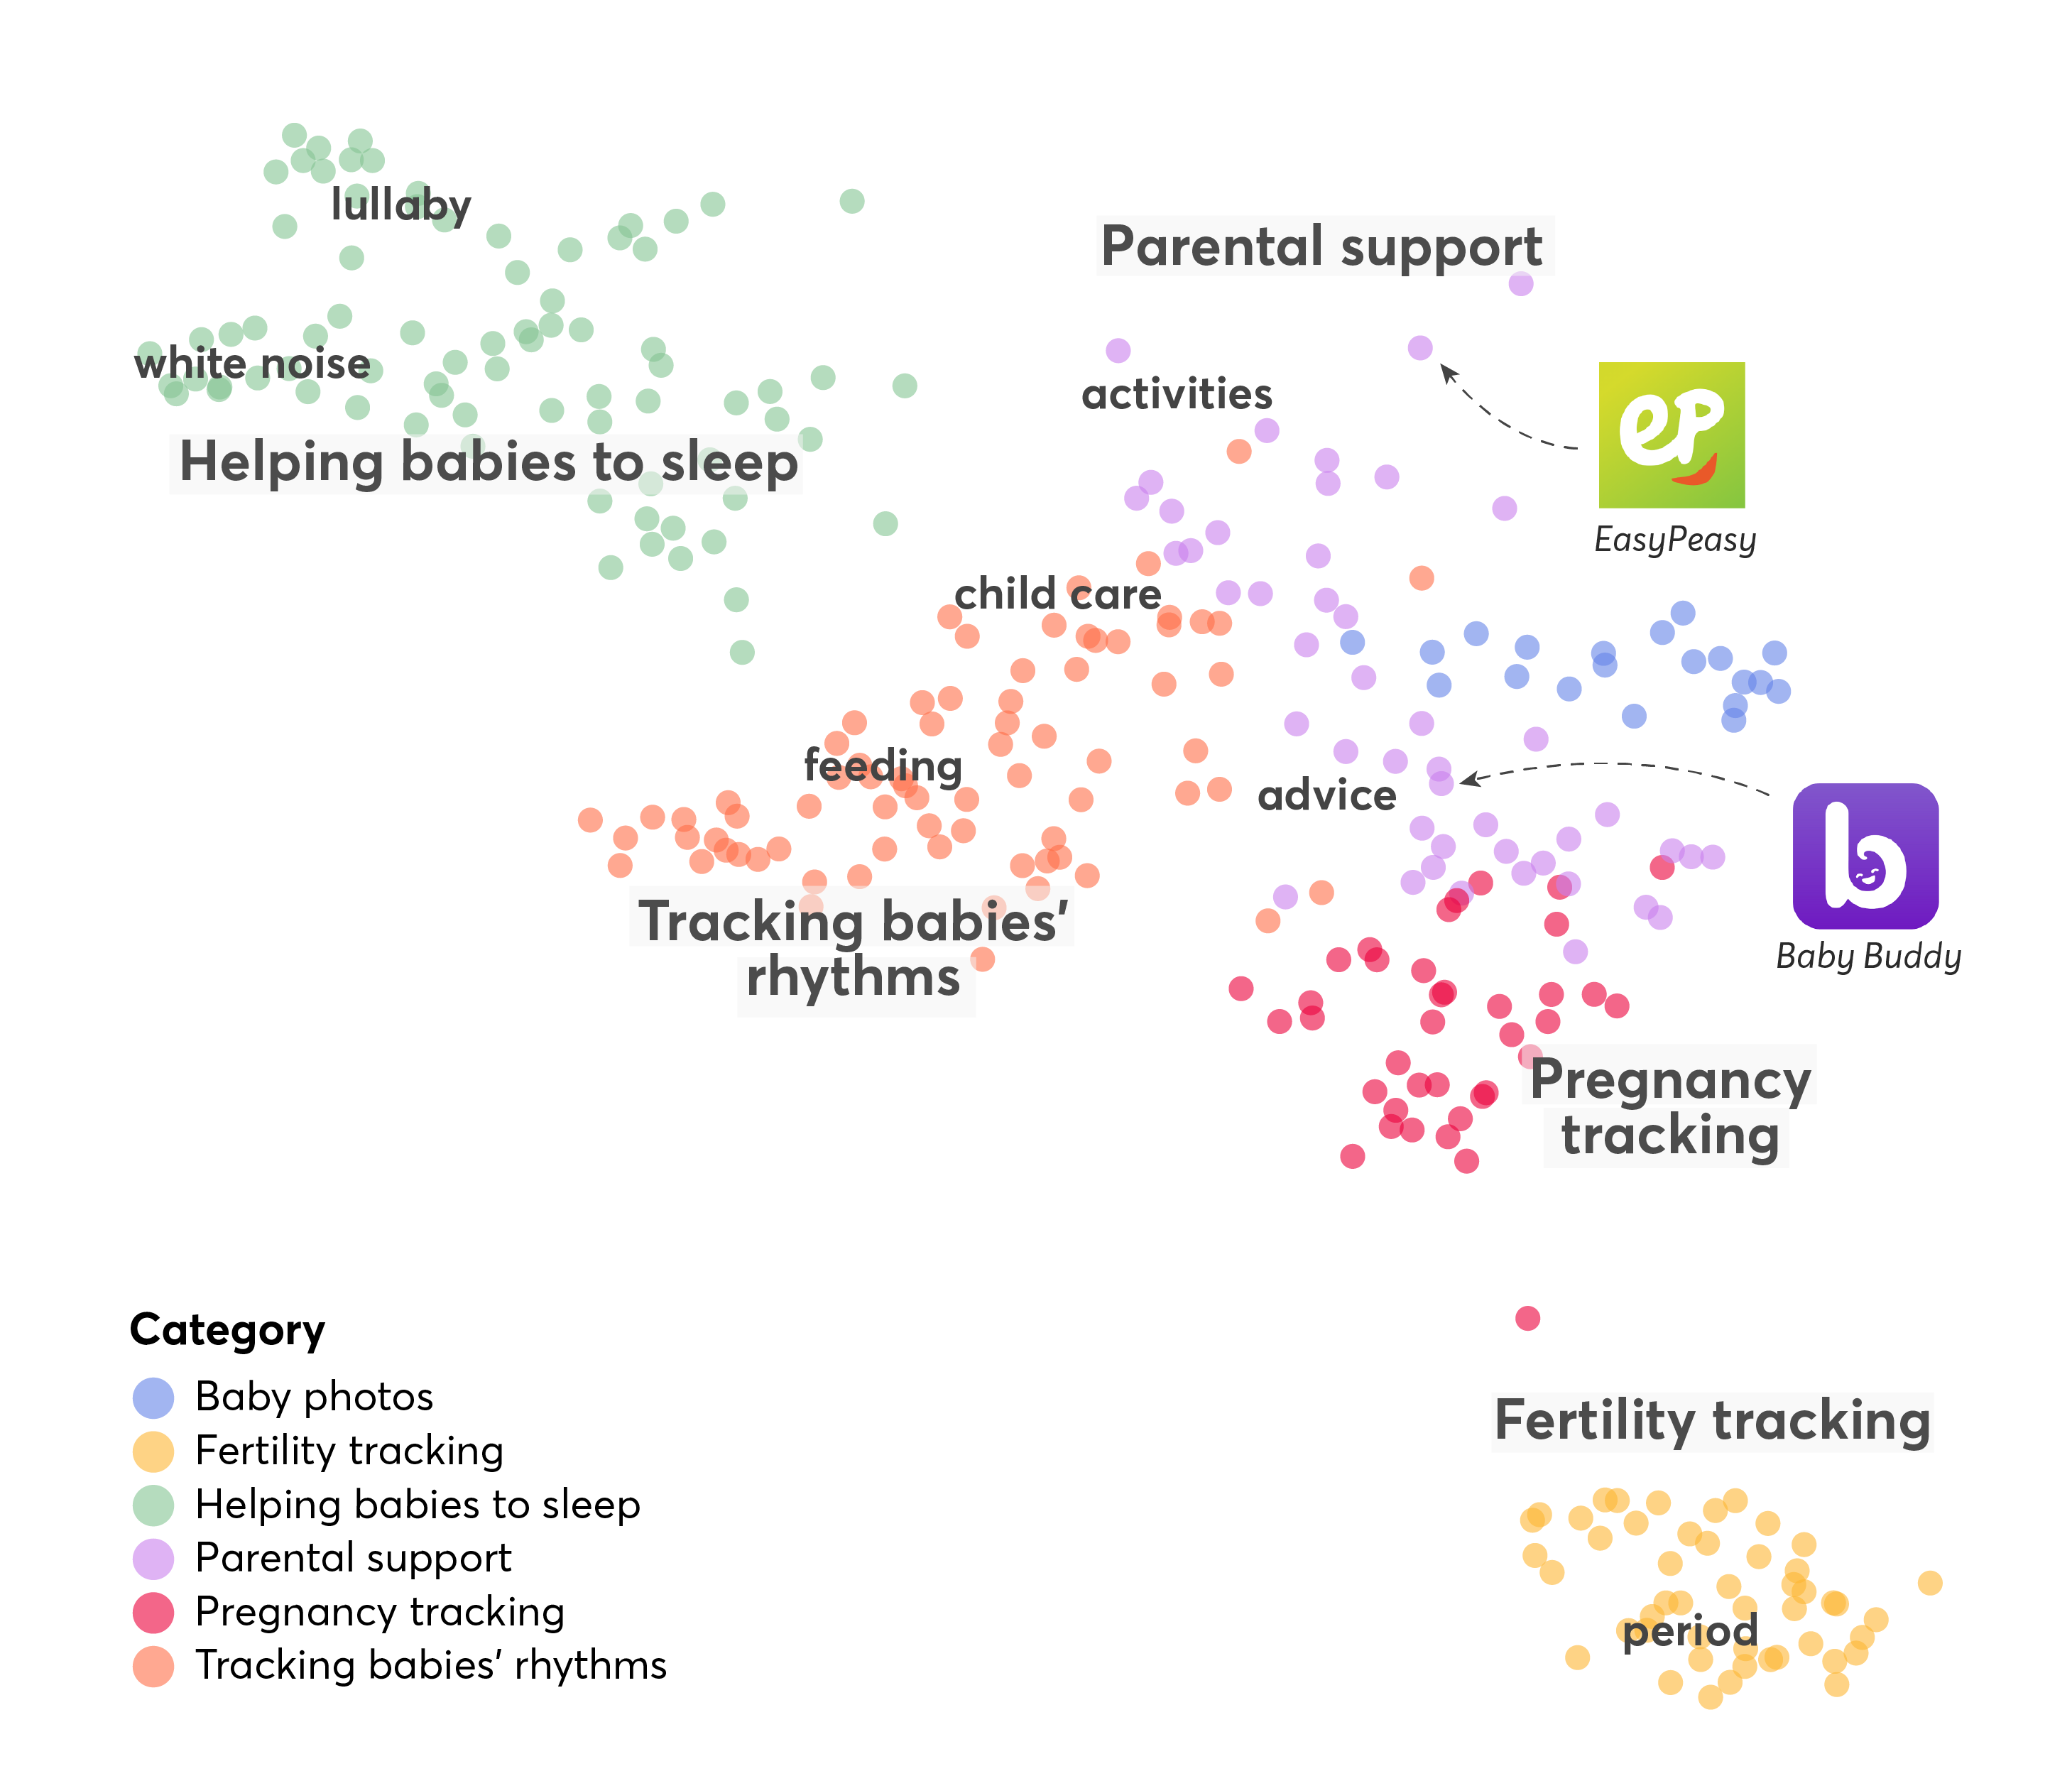 This graph is showing a scatter plot of about 300 points, where each point corresponds to either a parenting app in the UK Google Play Store. These points are grouped into broader, coherent categories based on the activities they facilitate (this is shown using different colours and text labels).

At the bottom of the graph there are apps for tracking fertility or periods, and tracking pregnancy. These are followed higher up by apps for providing parenting advice, allowing parents to track babies’ activities and developmental milestones, sharing baby photos, and helping put babies to sleep.